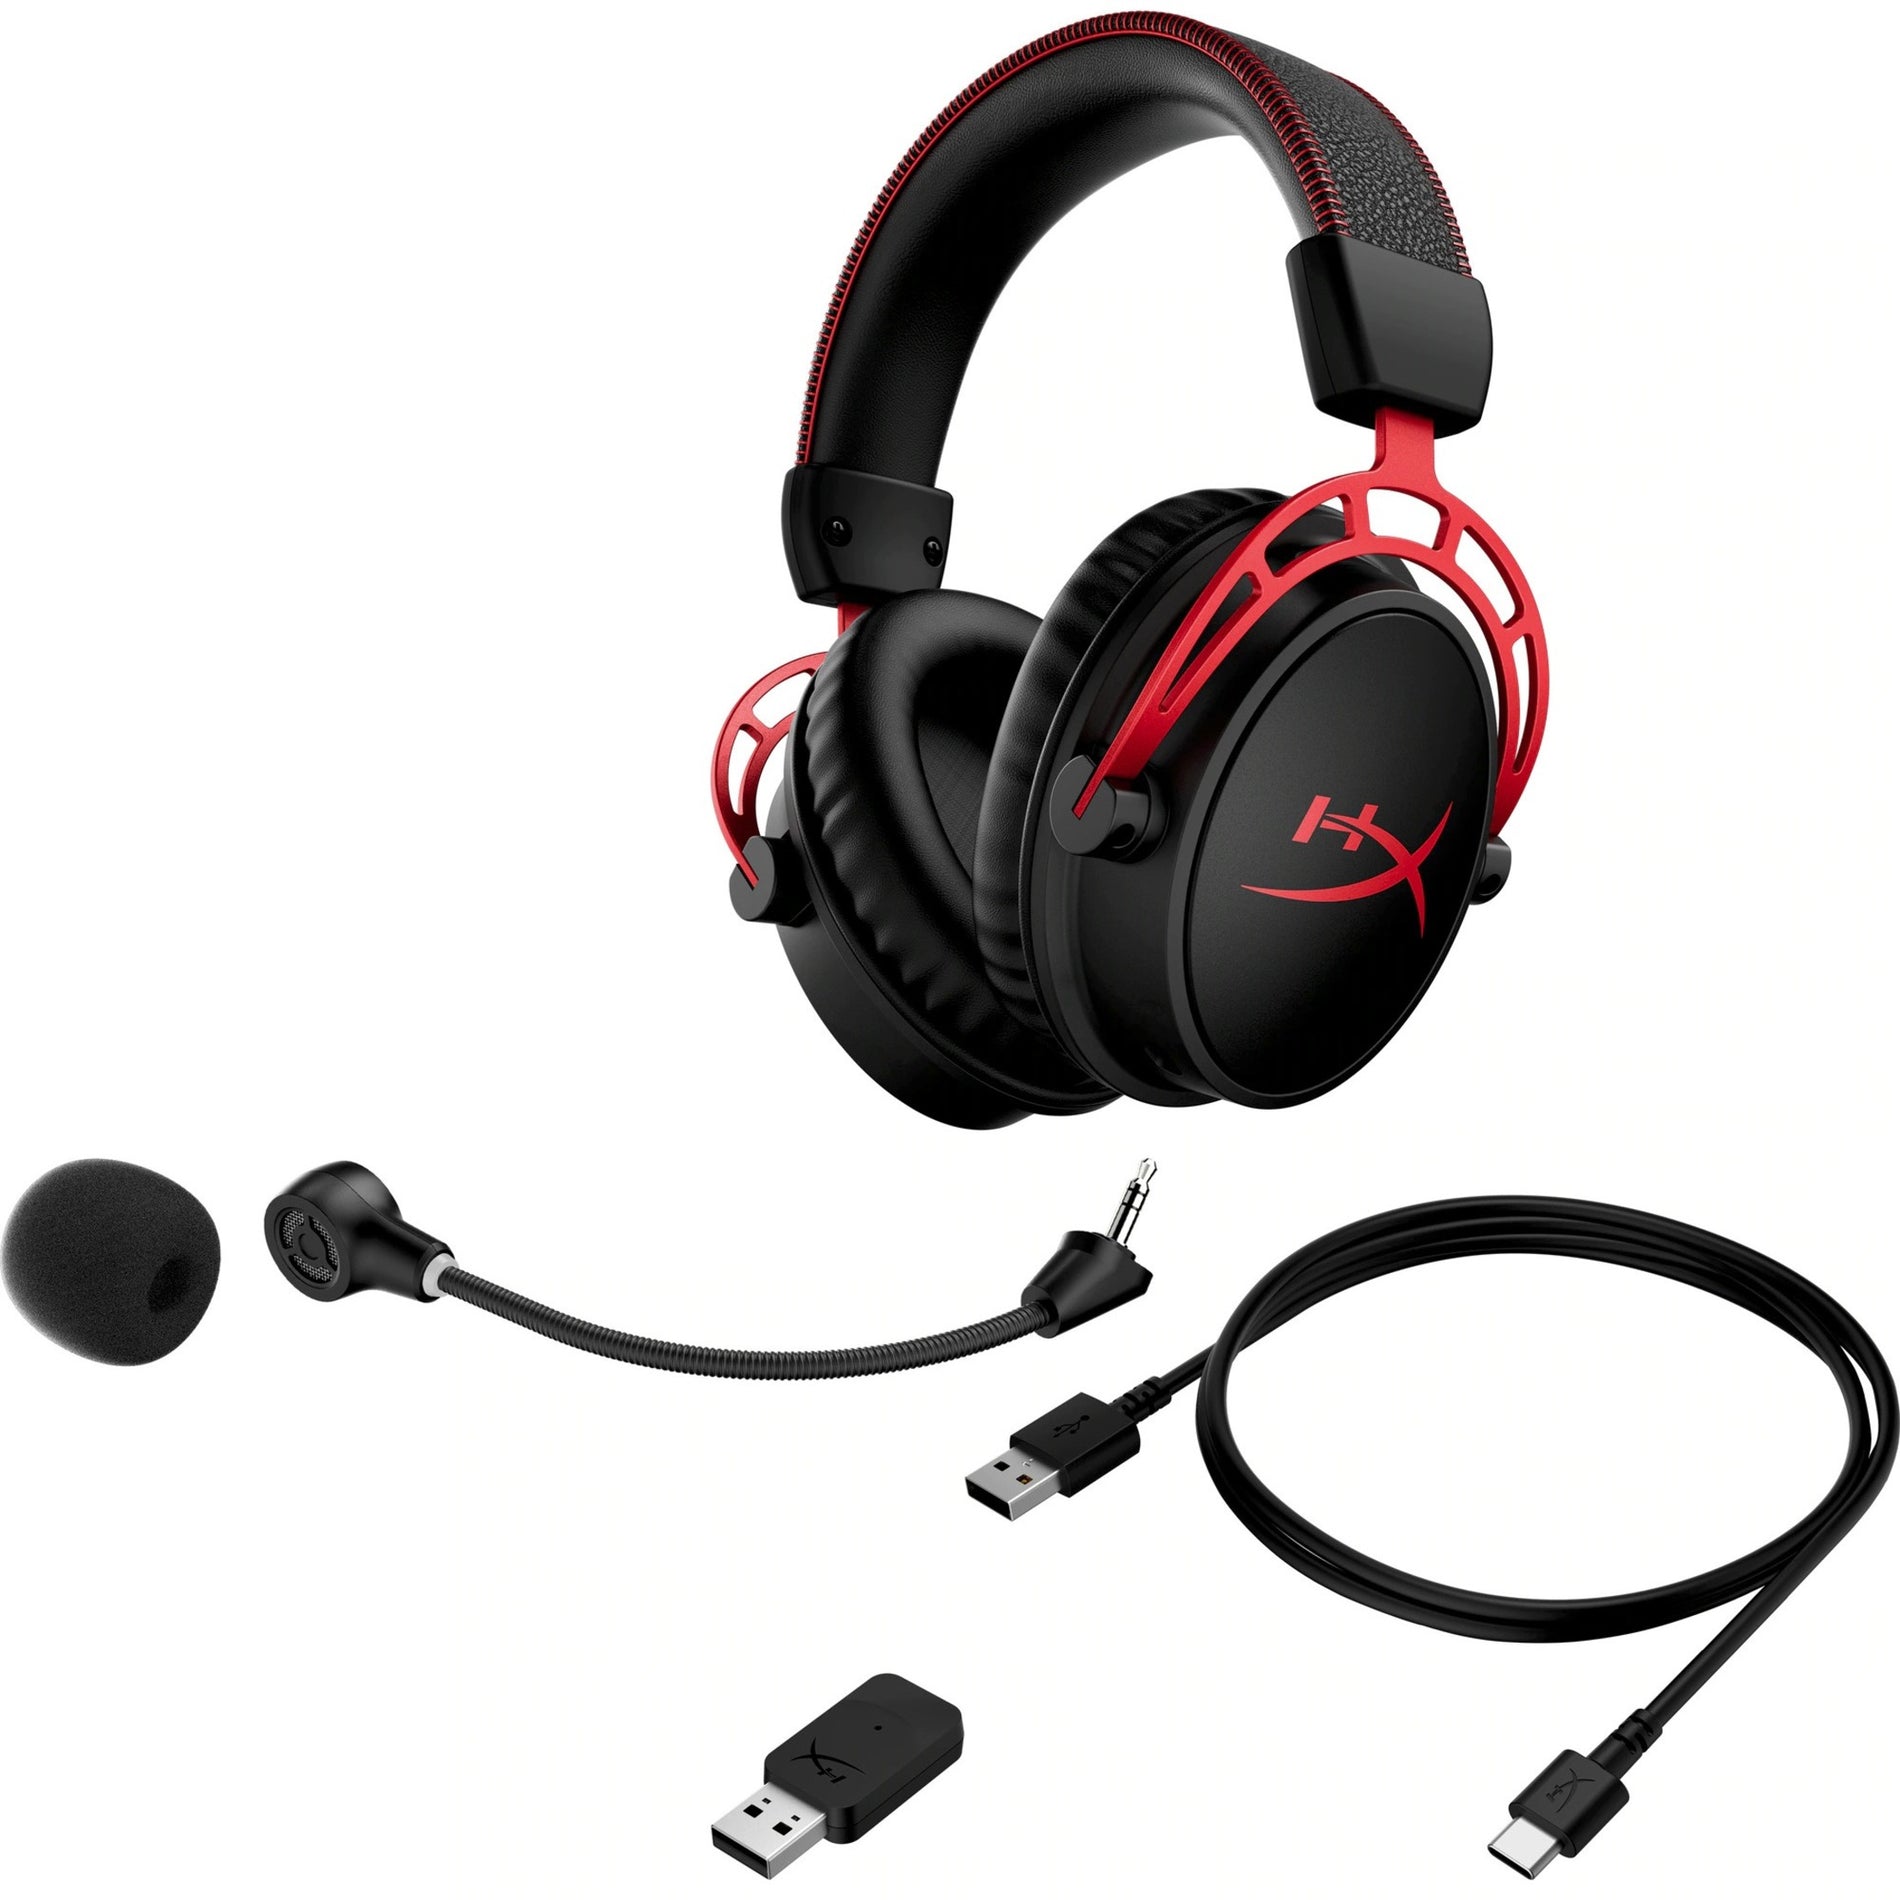 HyperX 4P5D4AA Cloud Alpha Wireless Gaming Headset (Black-Red), Binaural Over-the-ear, Detachable Microphone, Gaming Headset